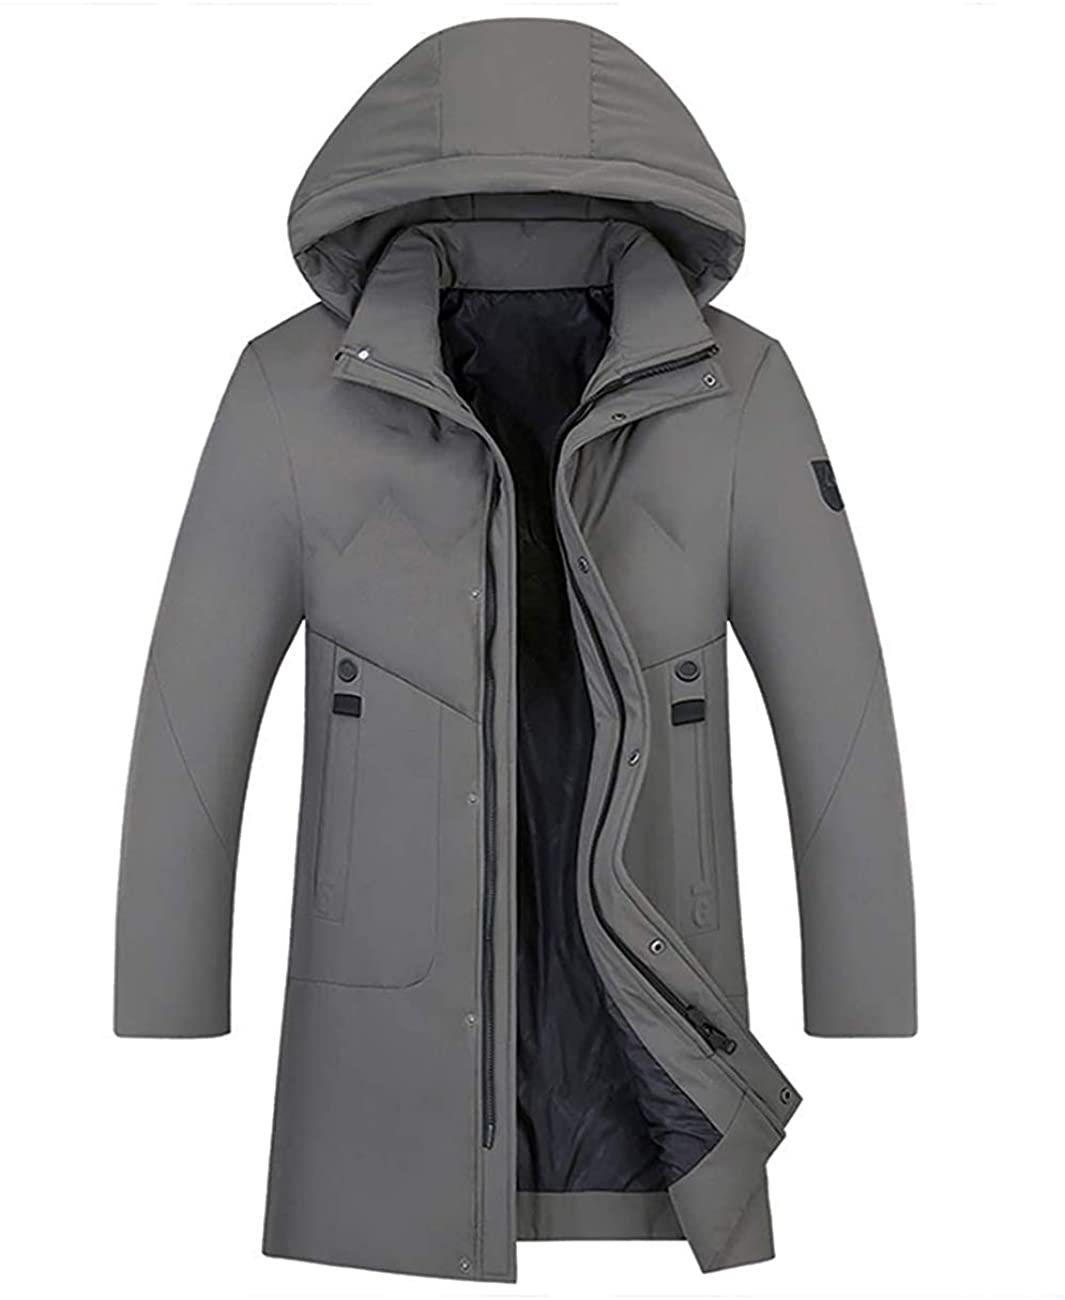 Men's Winter Stylish Warm Down Coat Long Jacket with Removable Hood - Home Decor Gifts and More